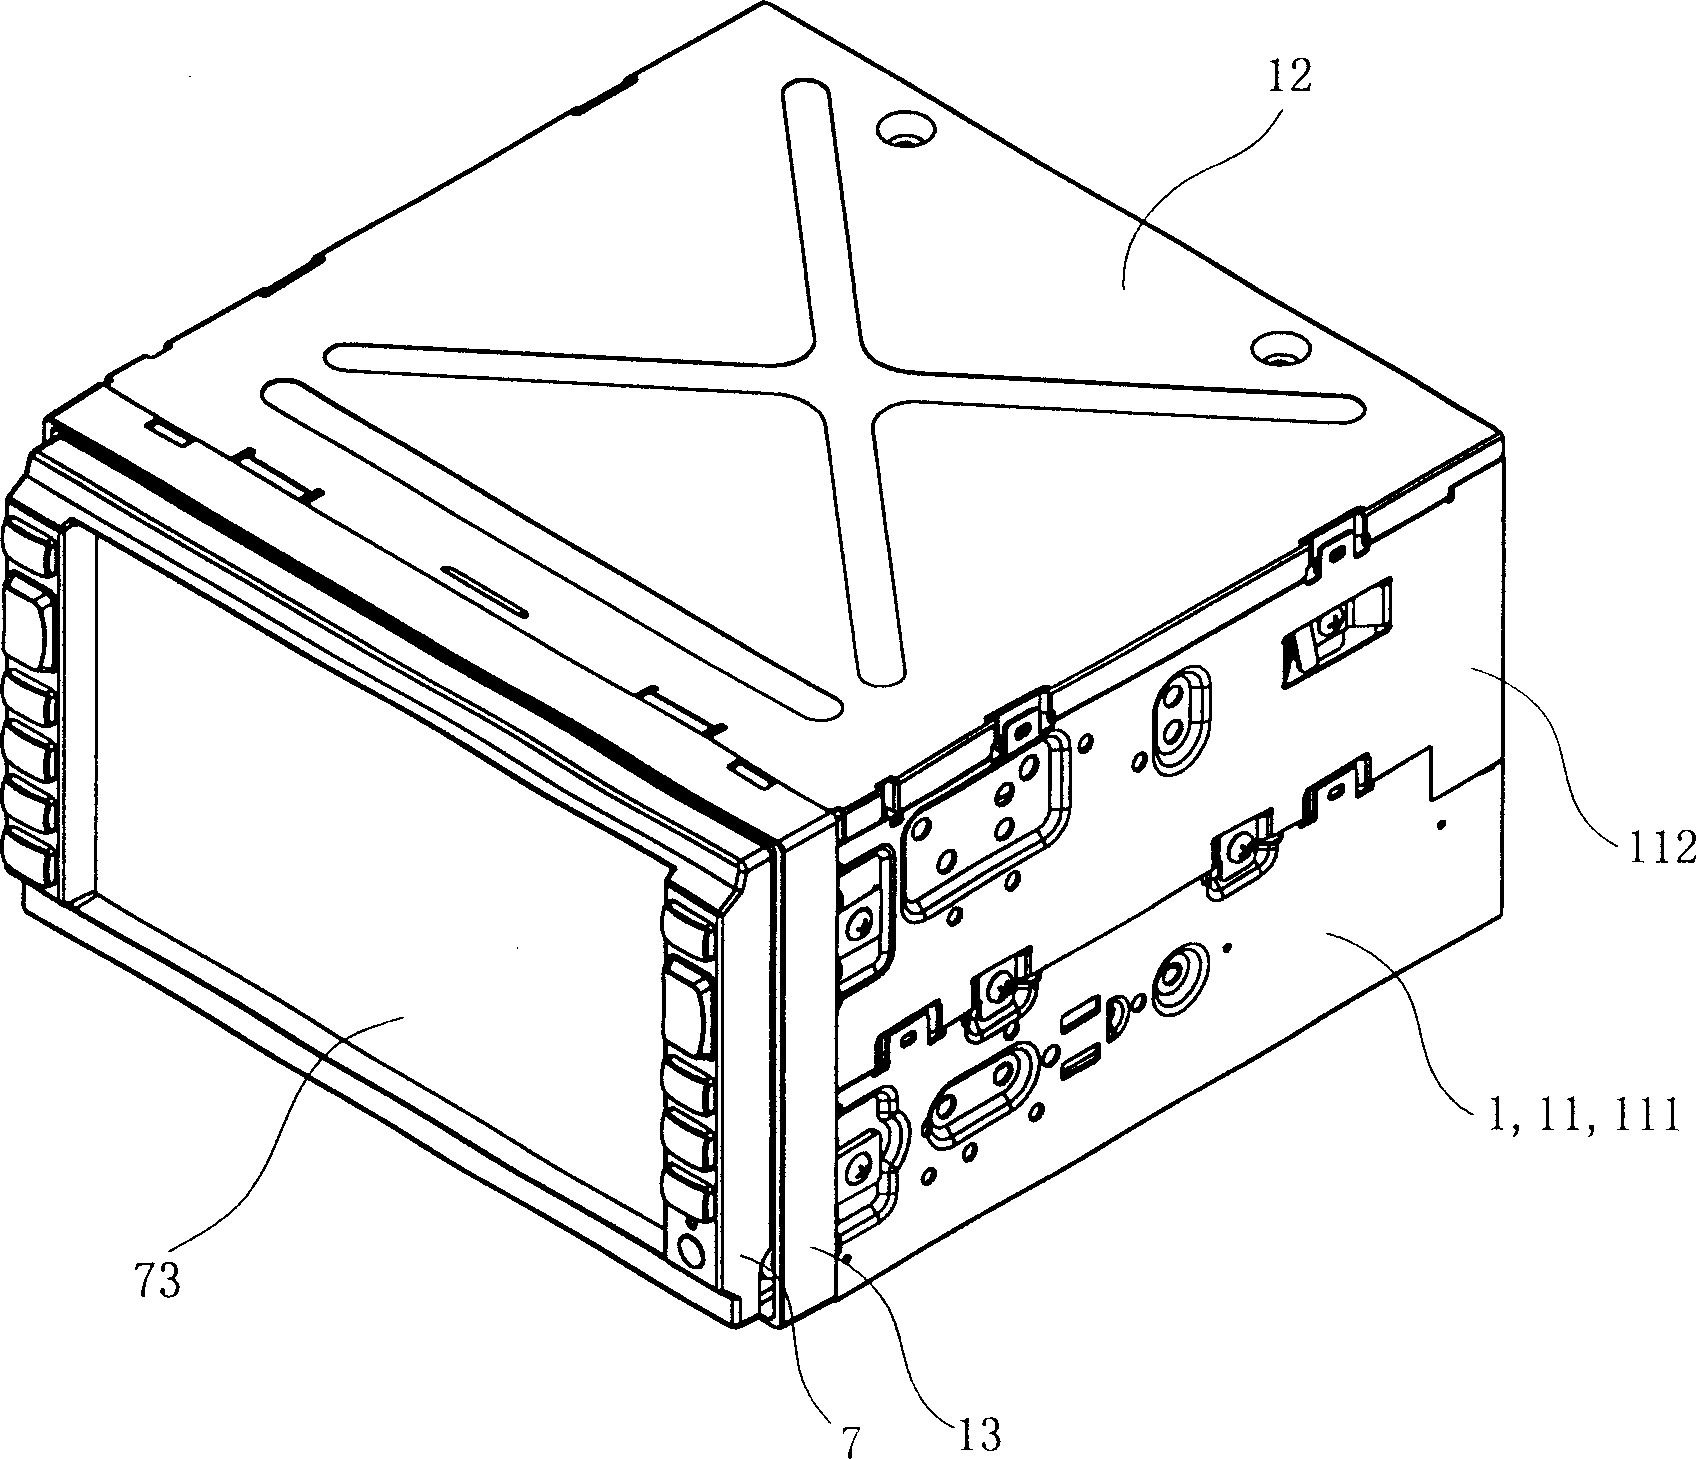 Mechanical parts of built-in vehicle video playing and displaying device